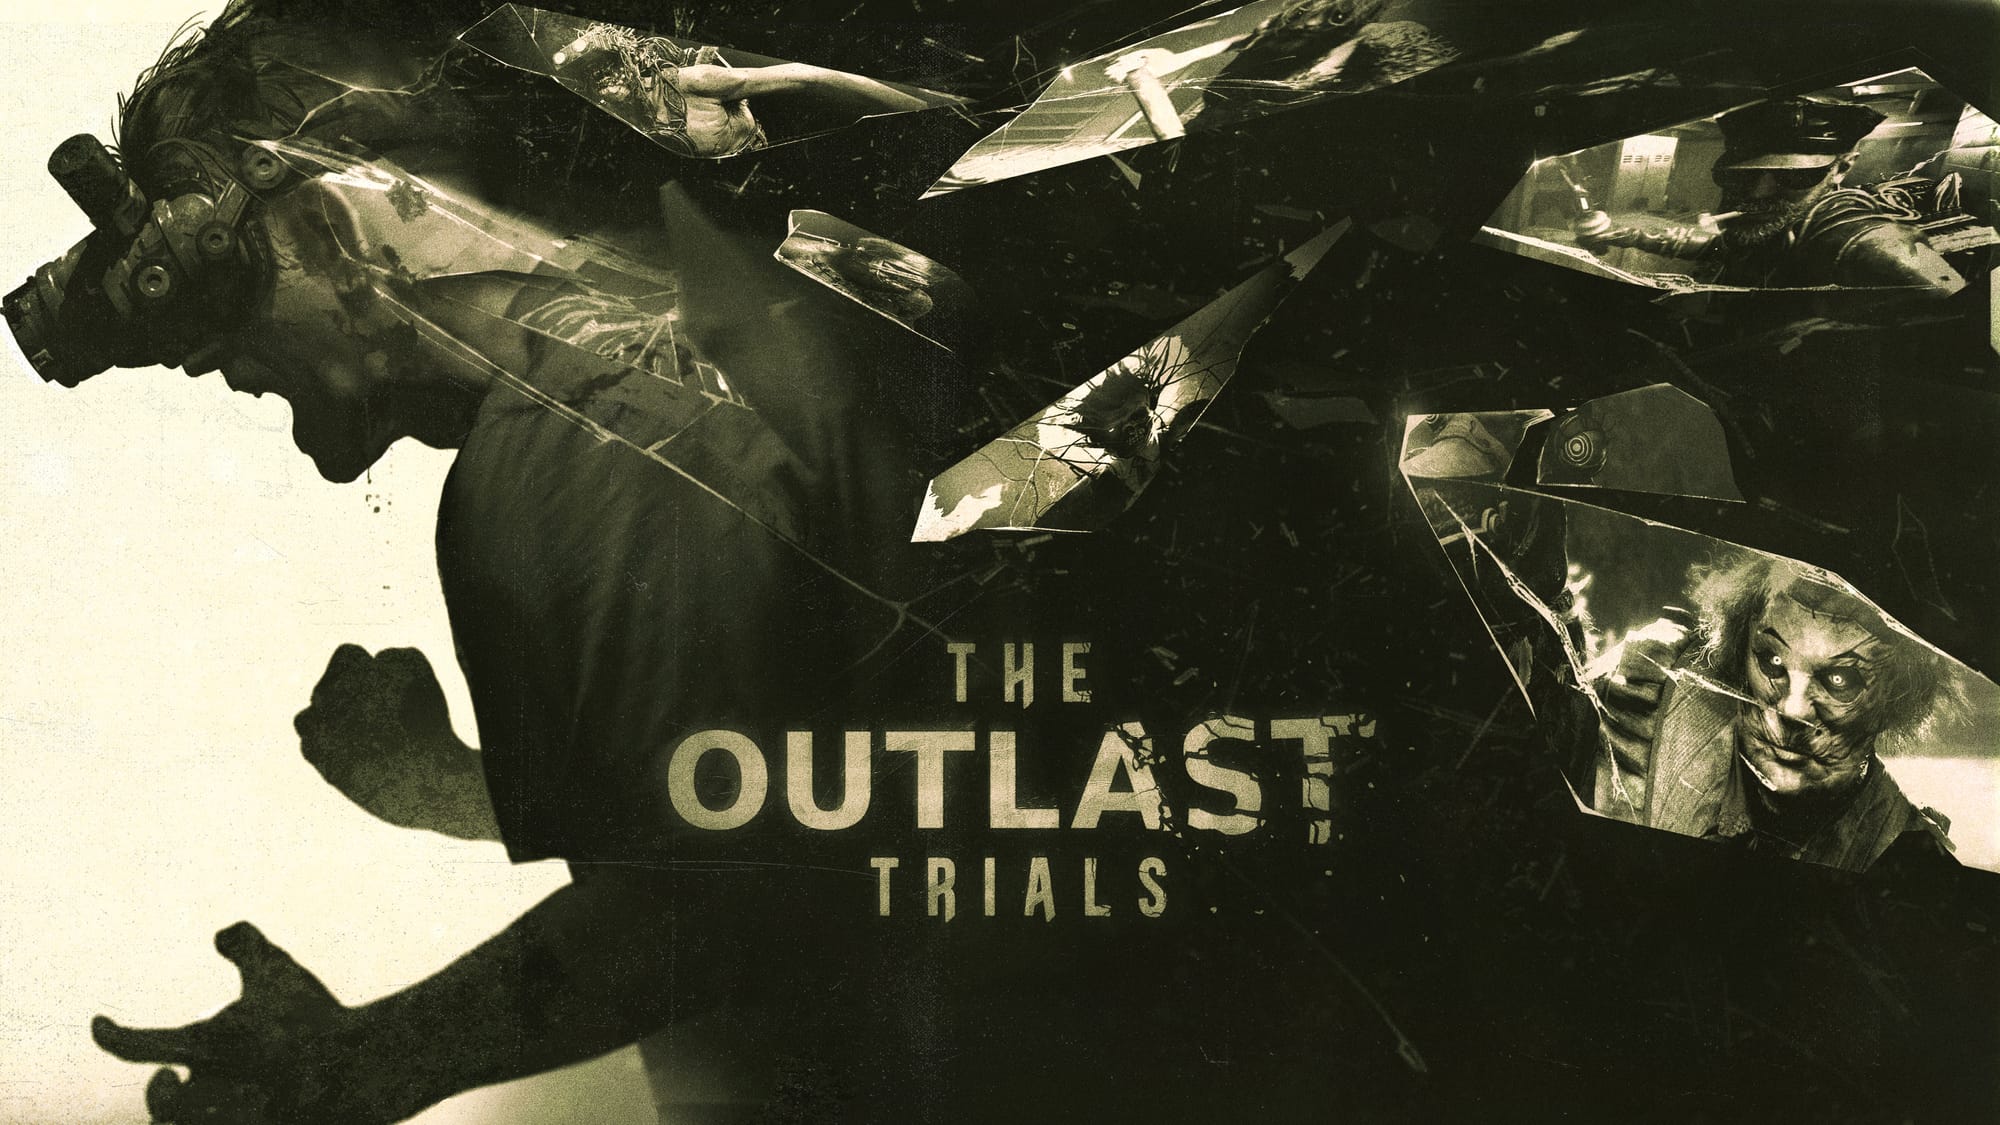 Red Barrels Launches The Outlast Trials, a Cooperative Multiplayer Horror Experience